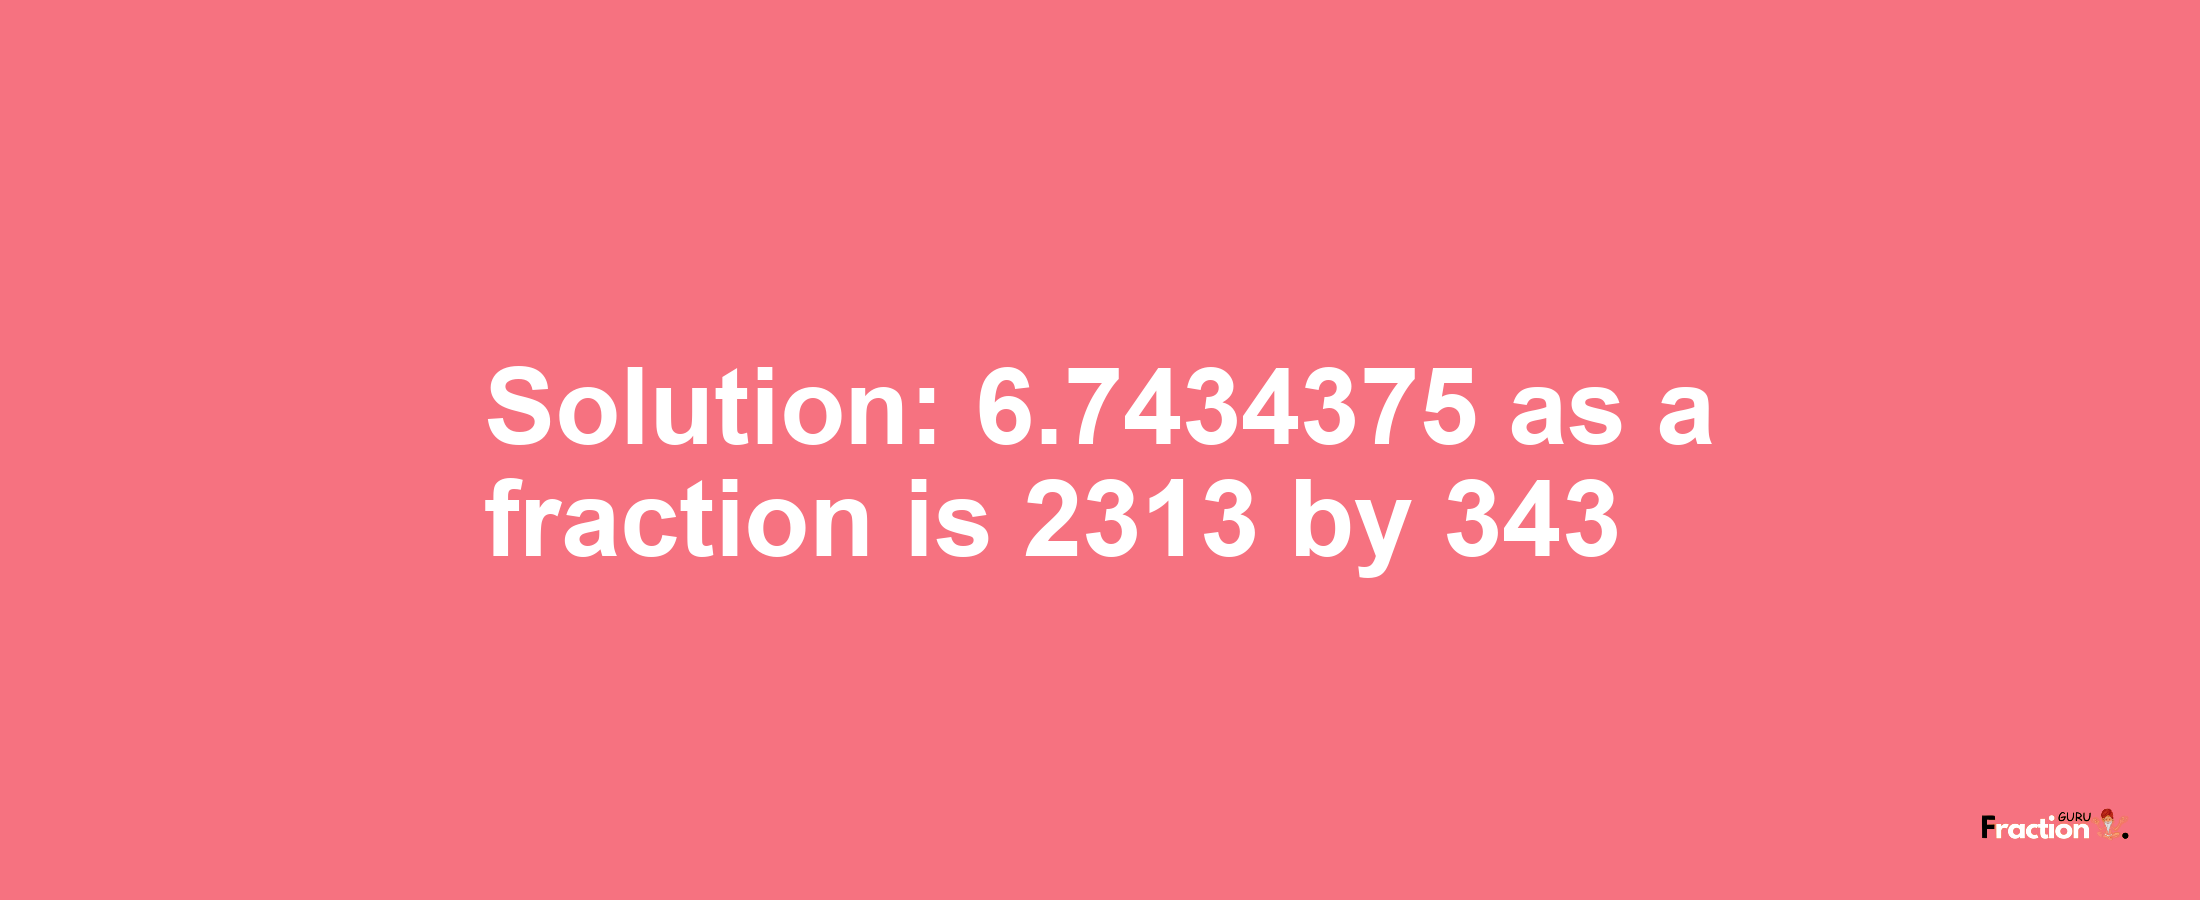 Solution:6.7434375 as a fraction is 2313/343